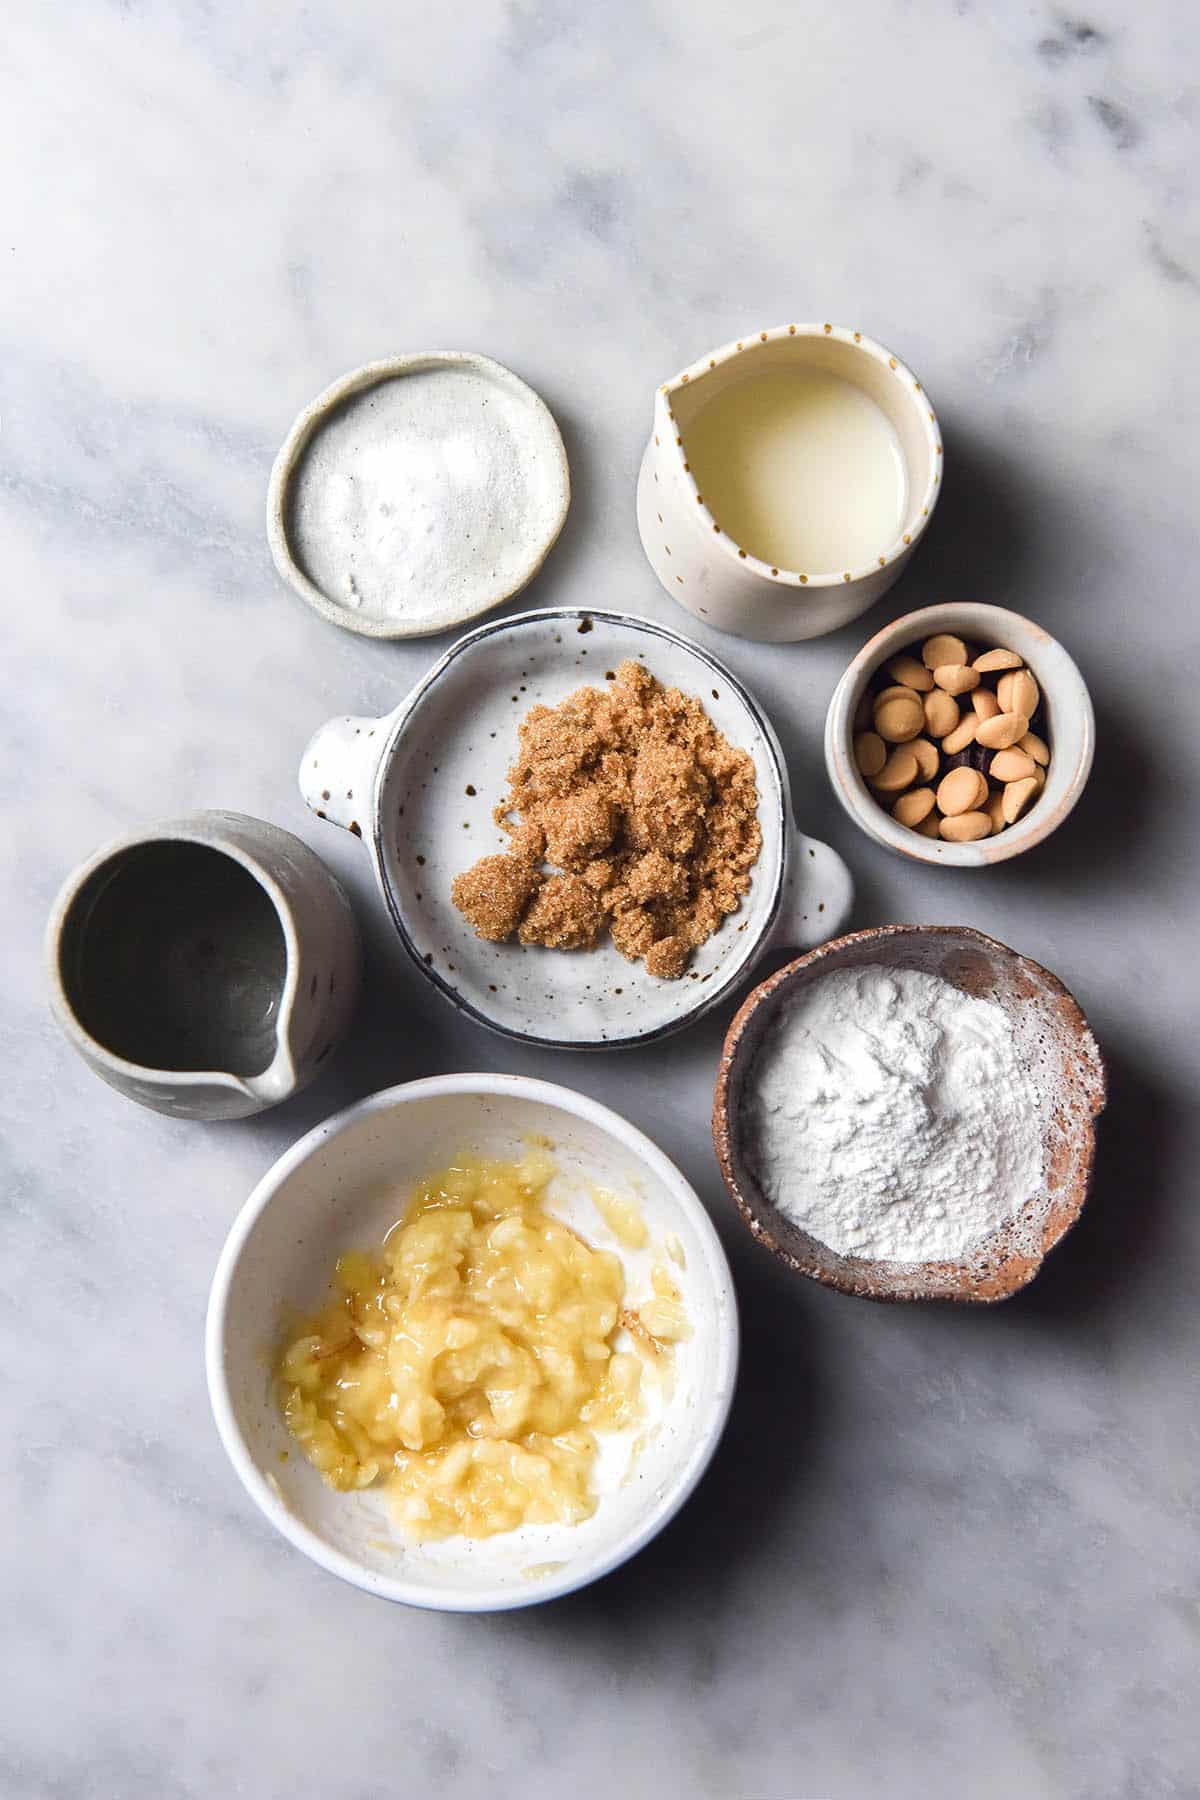 An aerial image of the ingredients used to make a gluten free banana mug cake arranged in white ceramic bowls on a white marble table